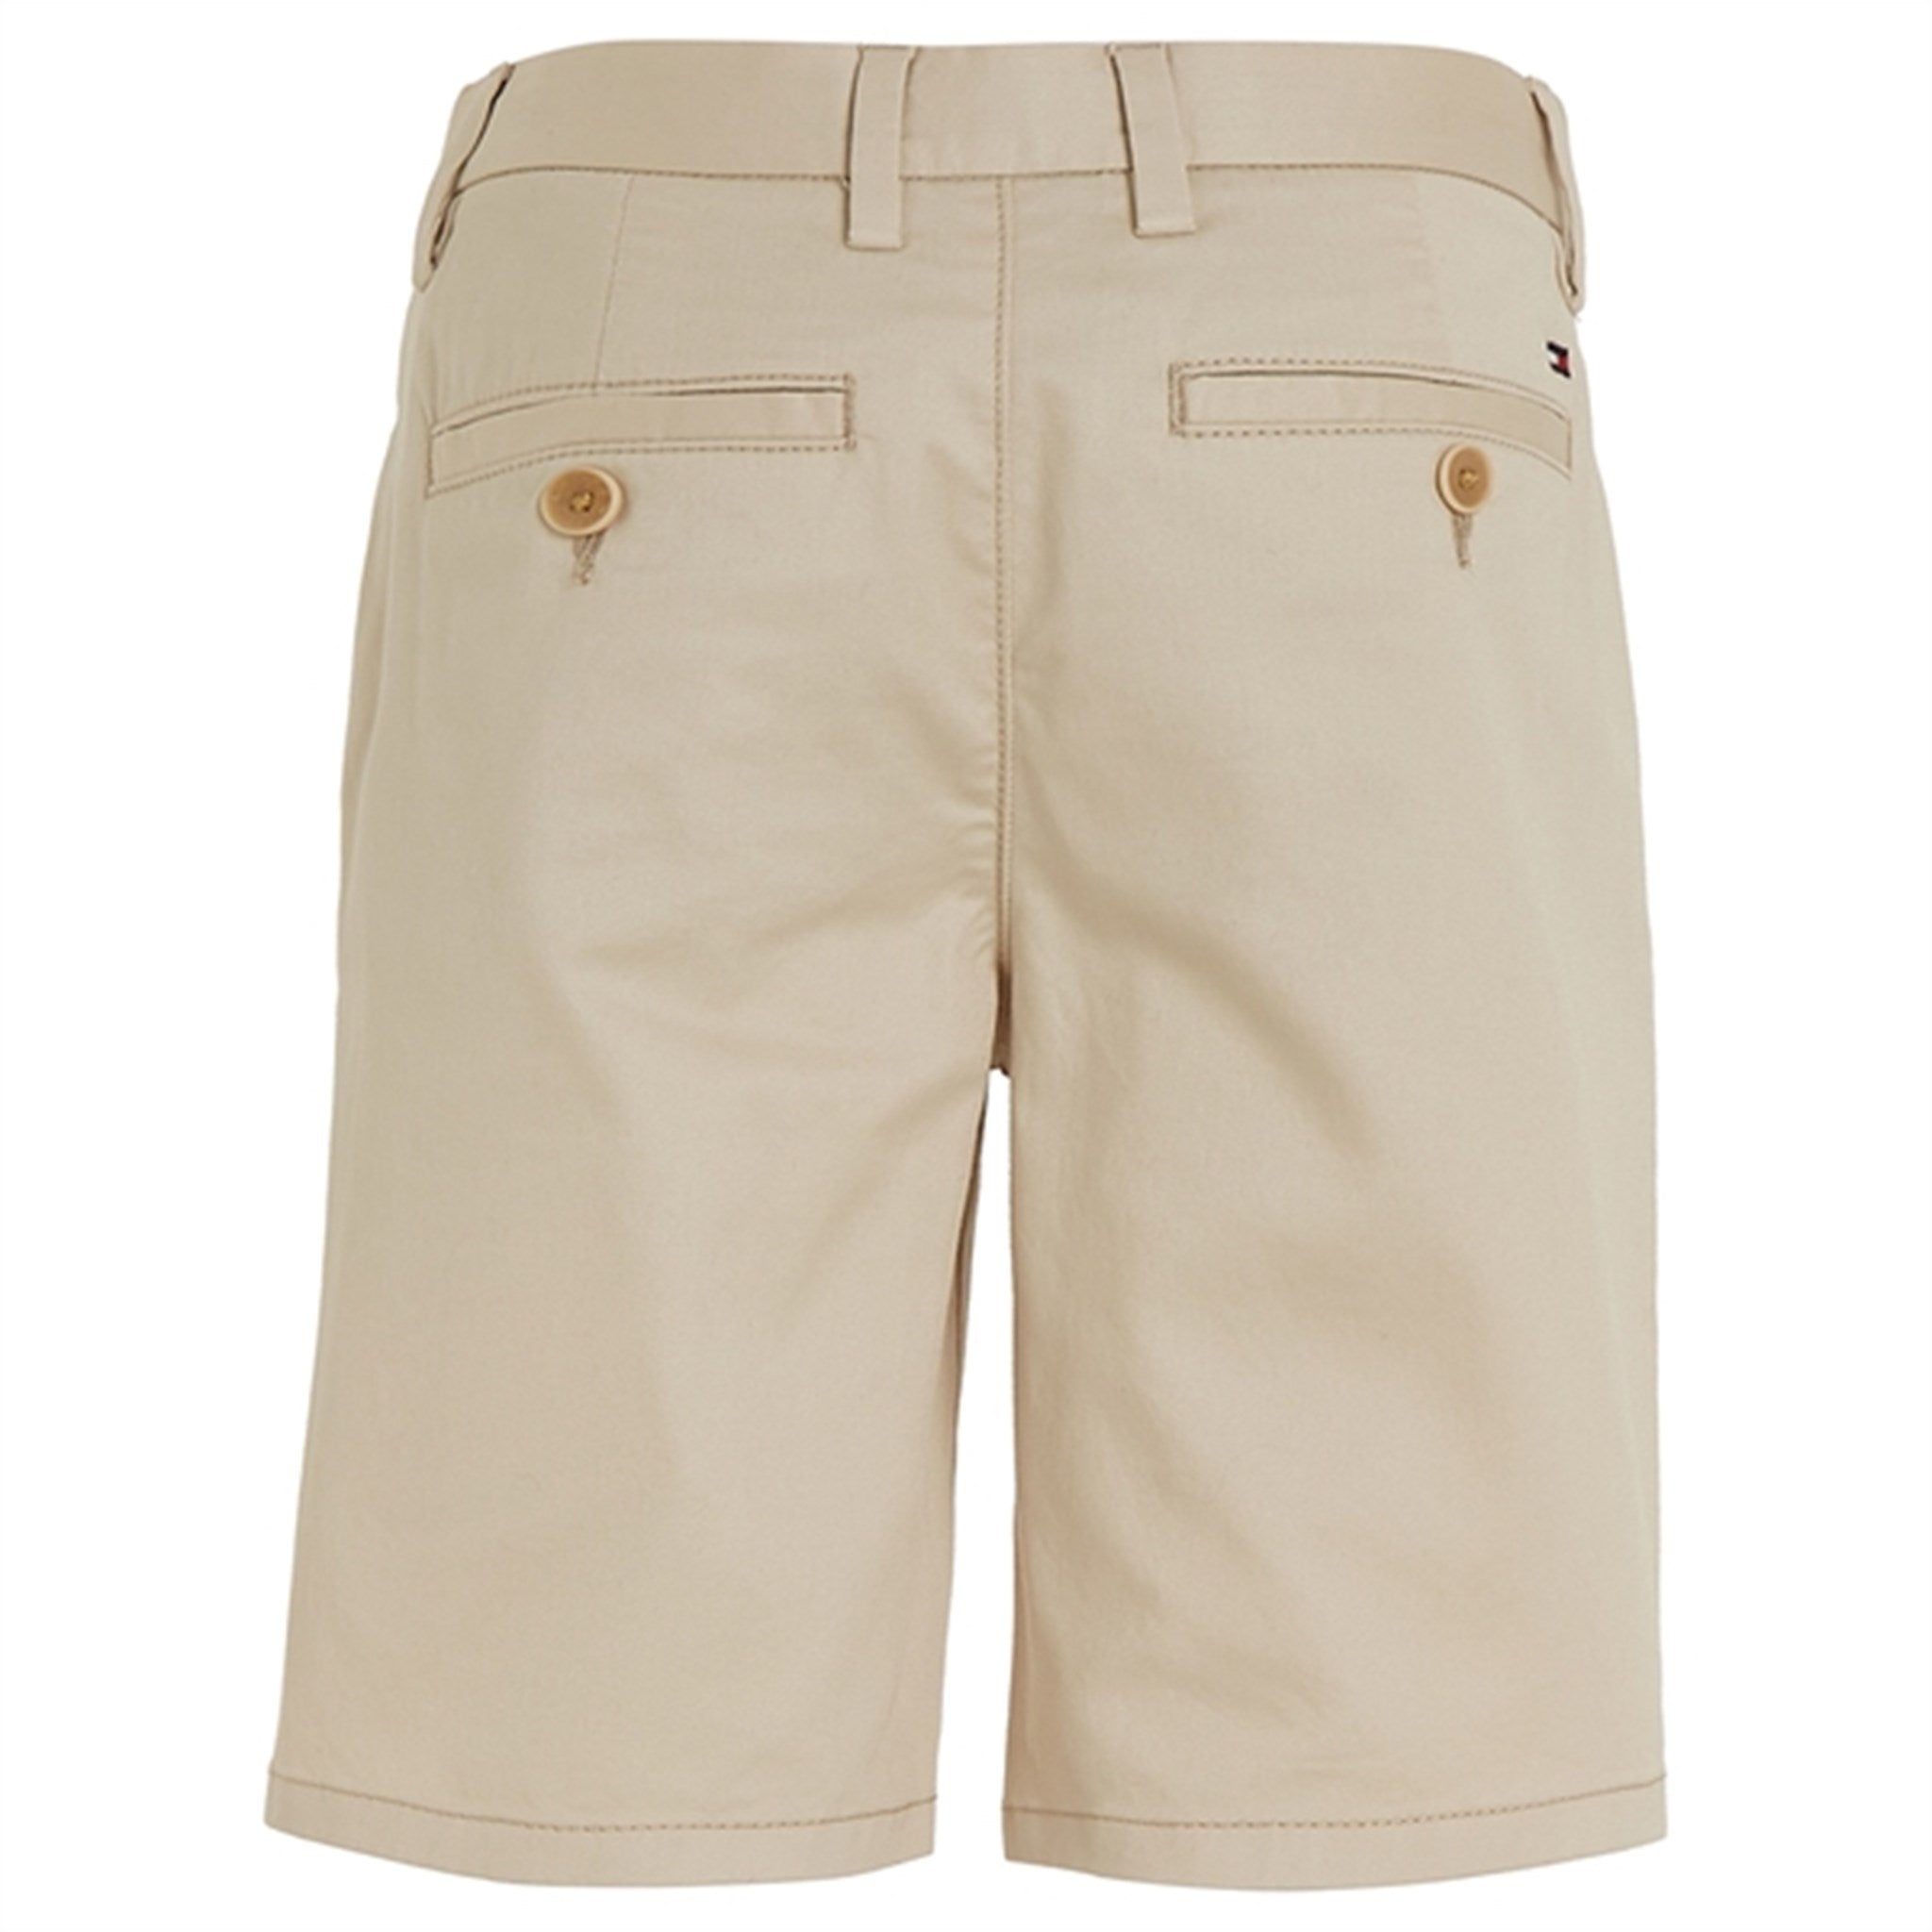 Tommy Hilfiger 1985 Chino Shorts Classic Beige 6